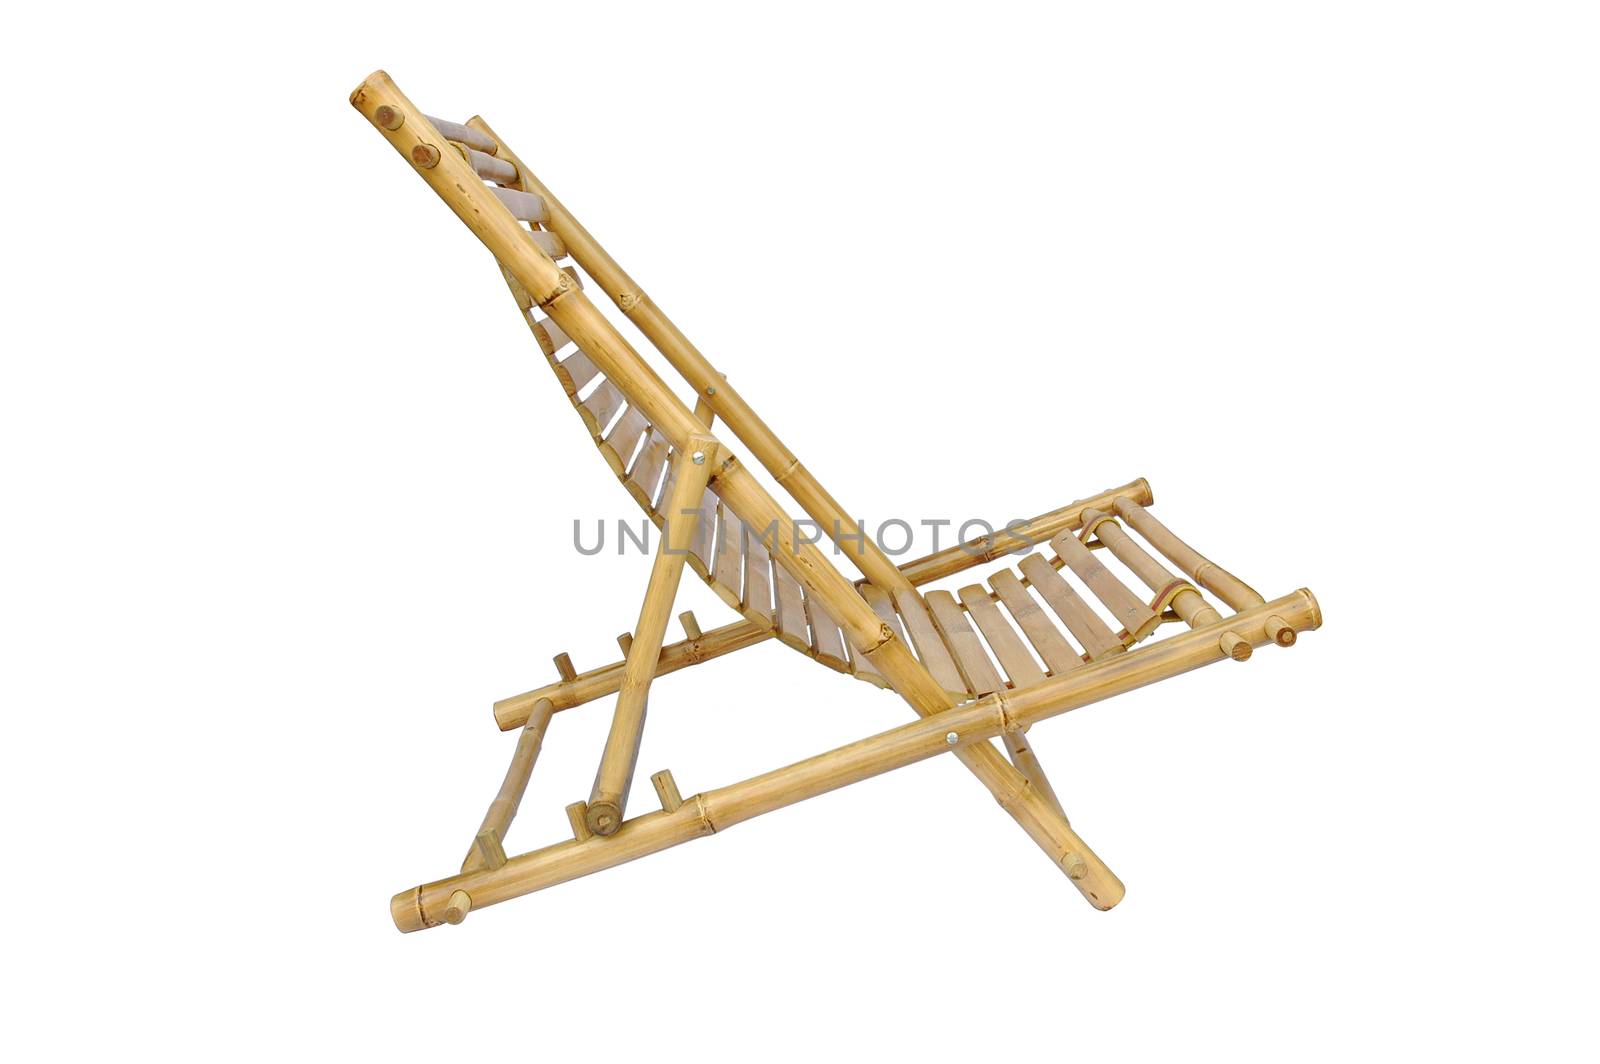 Bamboo lounge chair isolated on white background